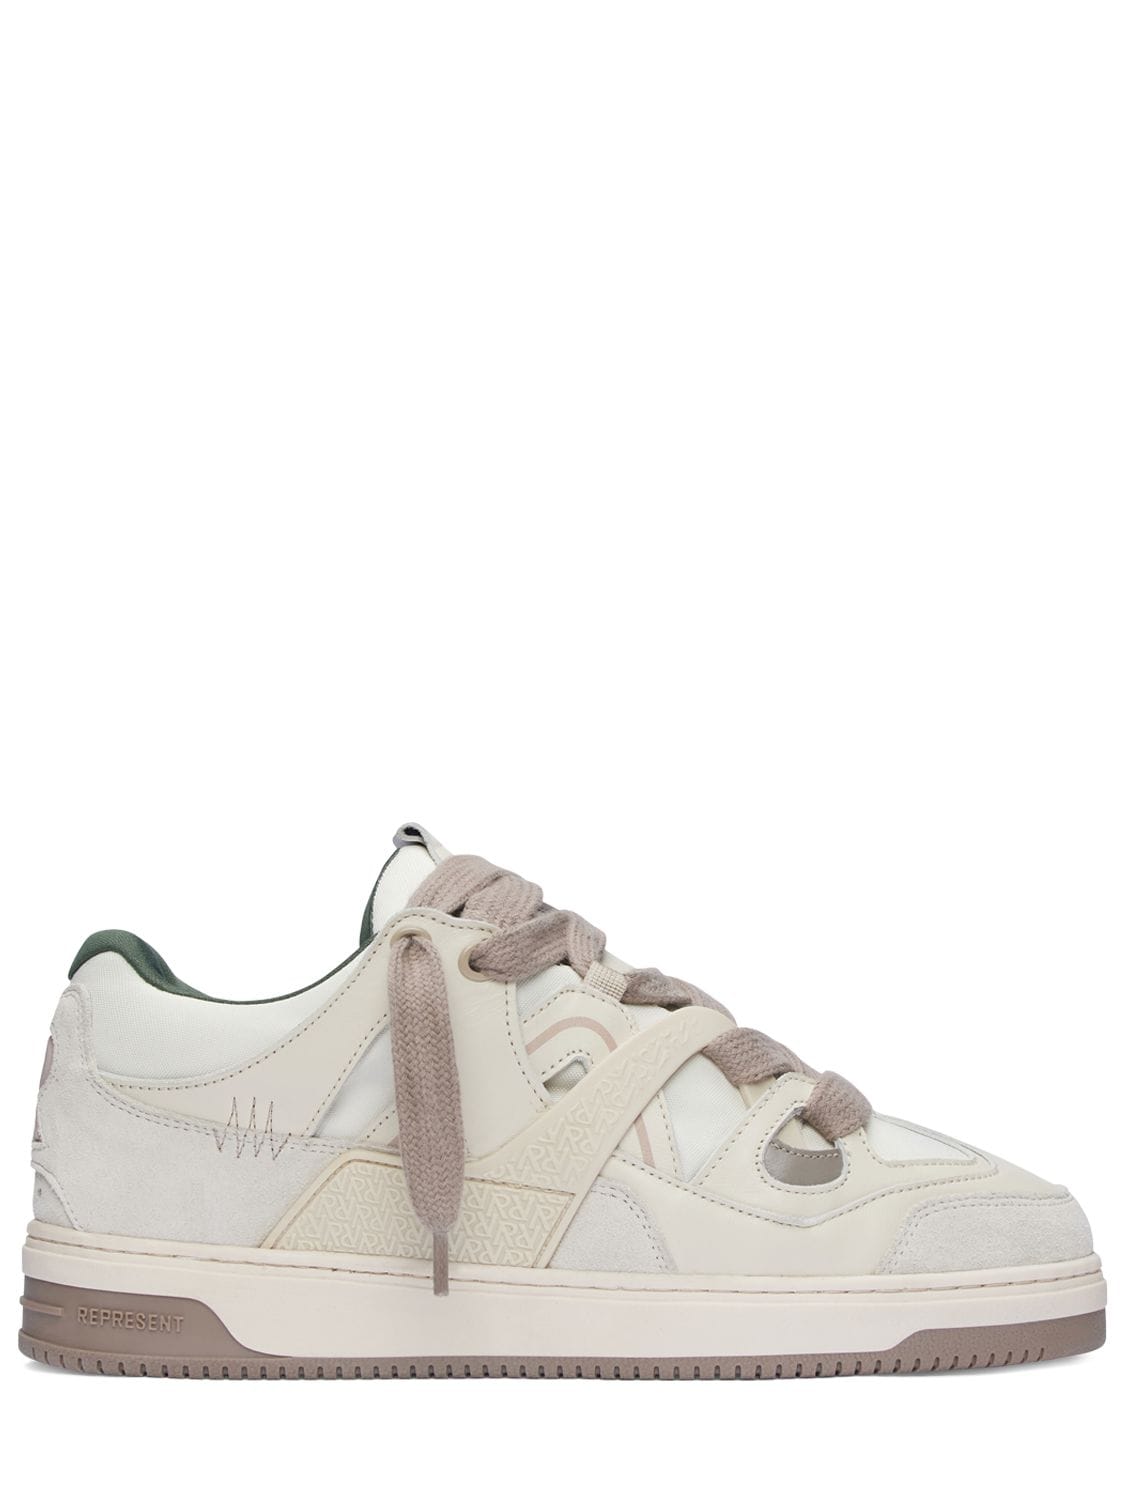 Represent Bully Panelled Sneakers In Neutrals